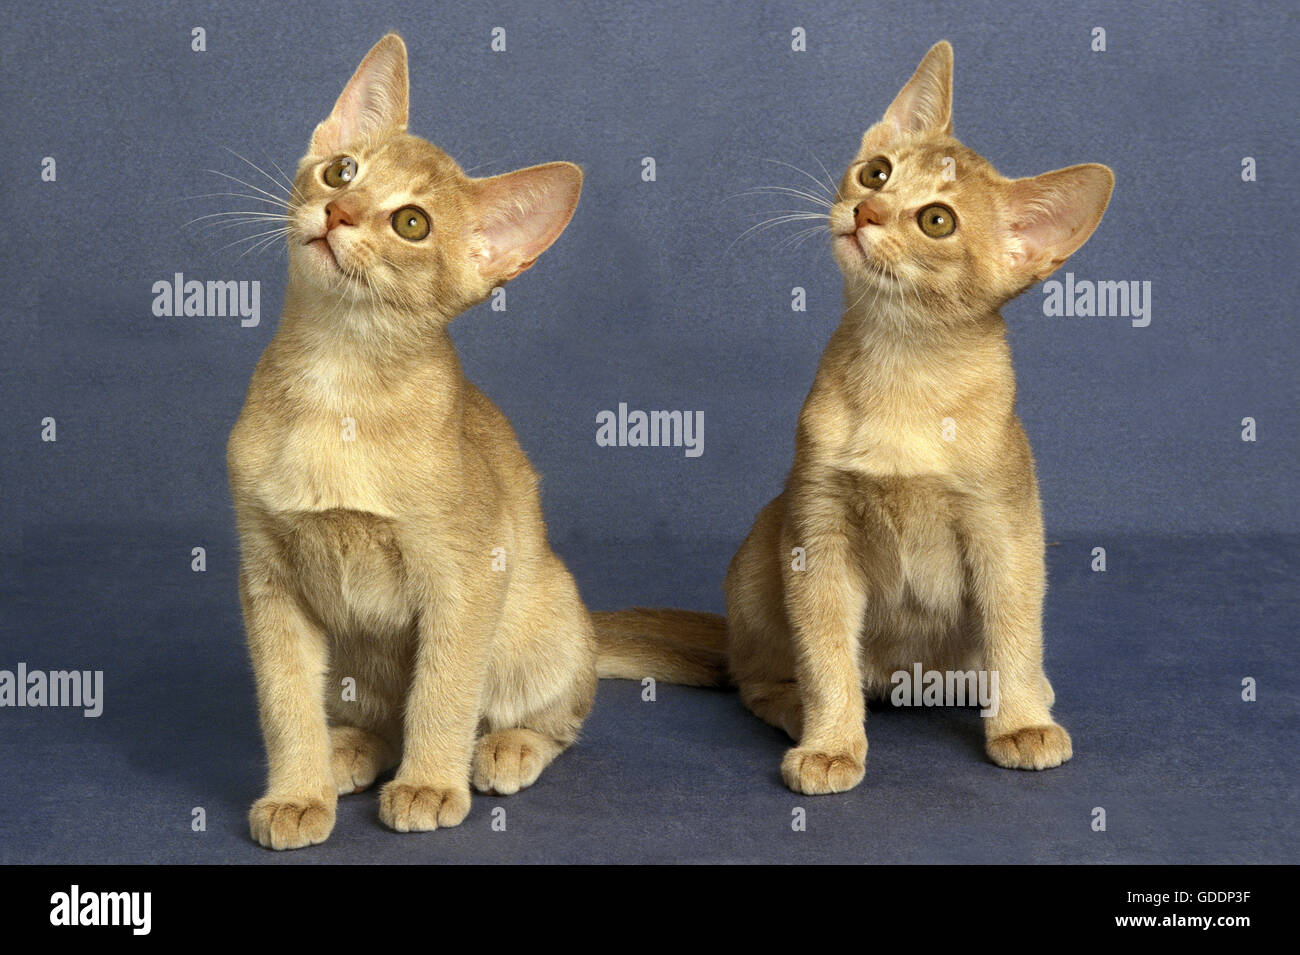 Fawn Abyssinian Domestic Cat, Kittens Stock Photo